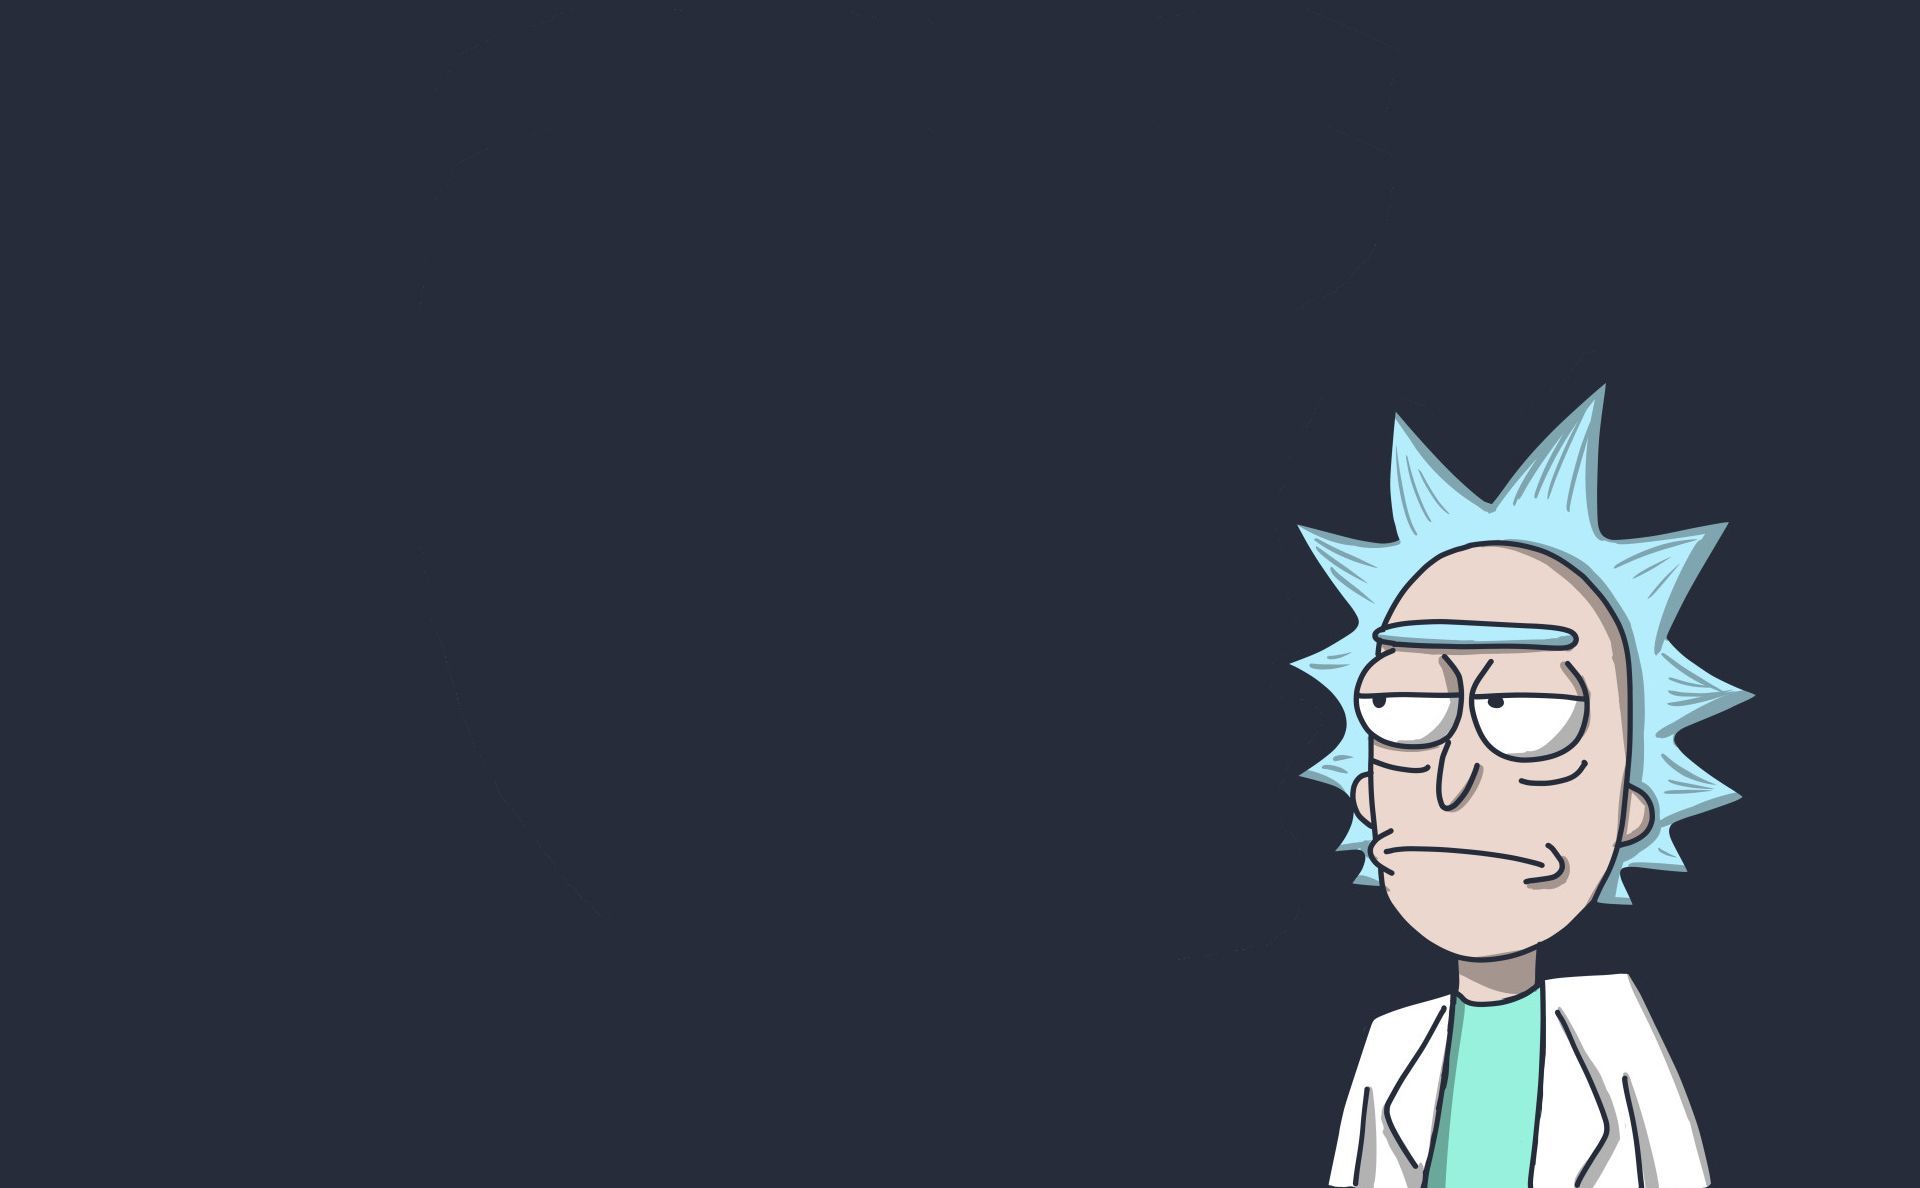 Wallpaper for laptop Rick And Morty. Computer wallpaper desktop wallpaper, Laptop wallpaper, Cartoon wallpaper